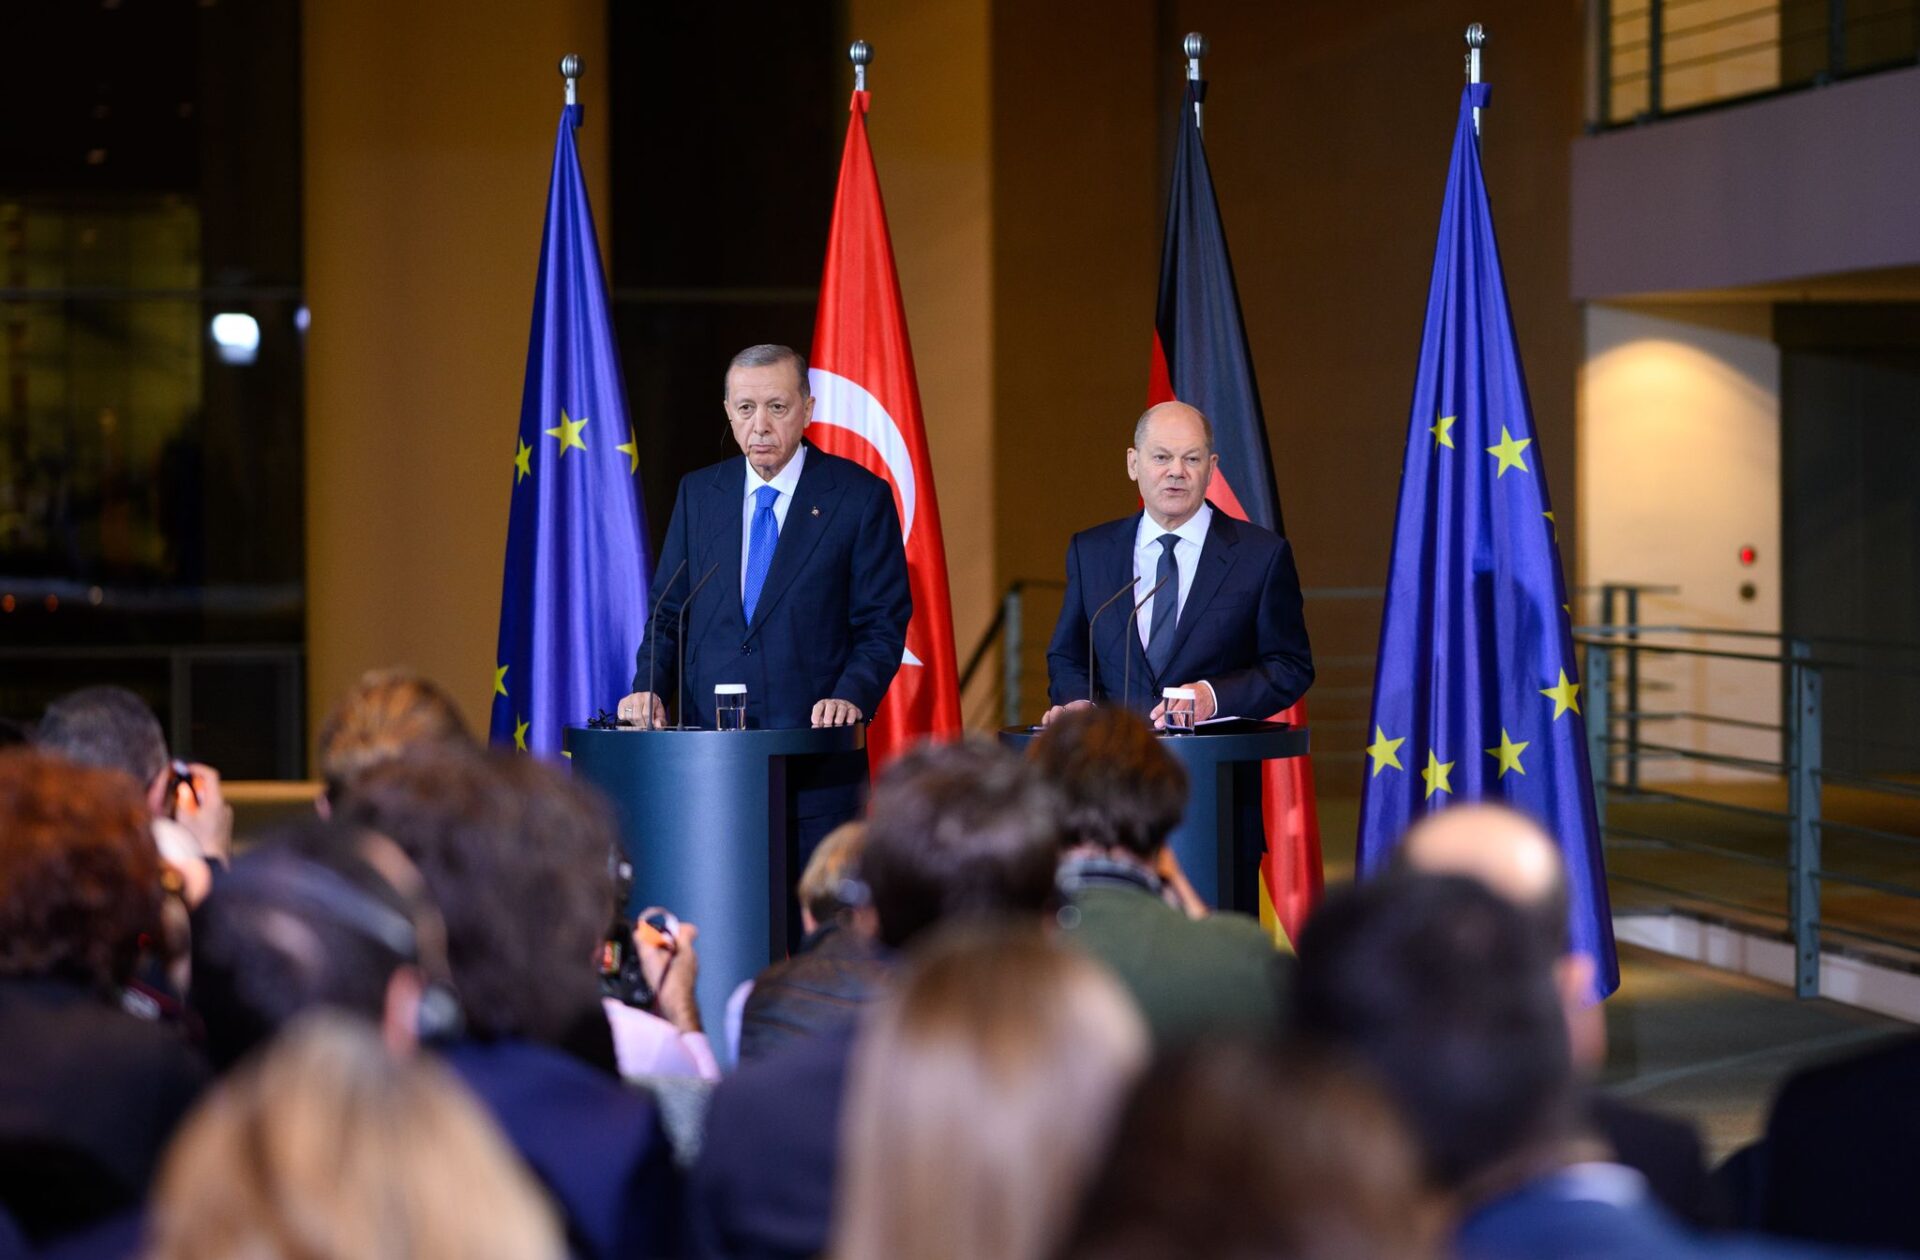 Europe in brief: Scholz urges Turkey to cooperate with EU on migration